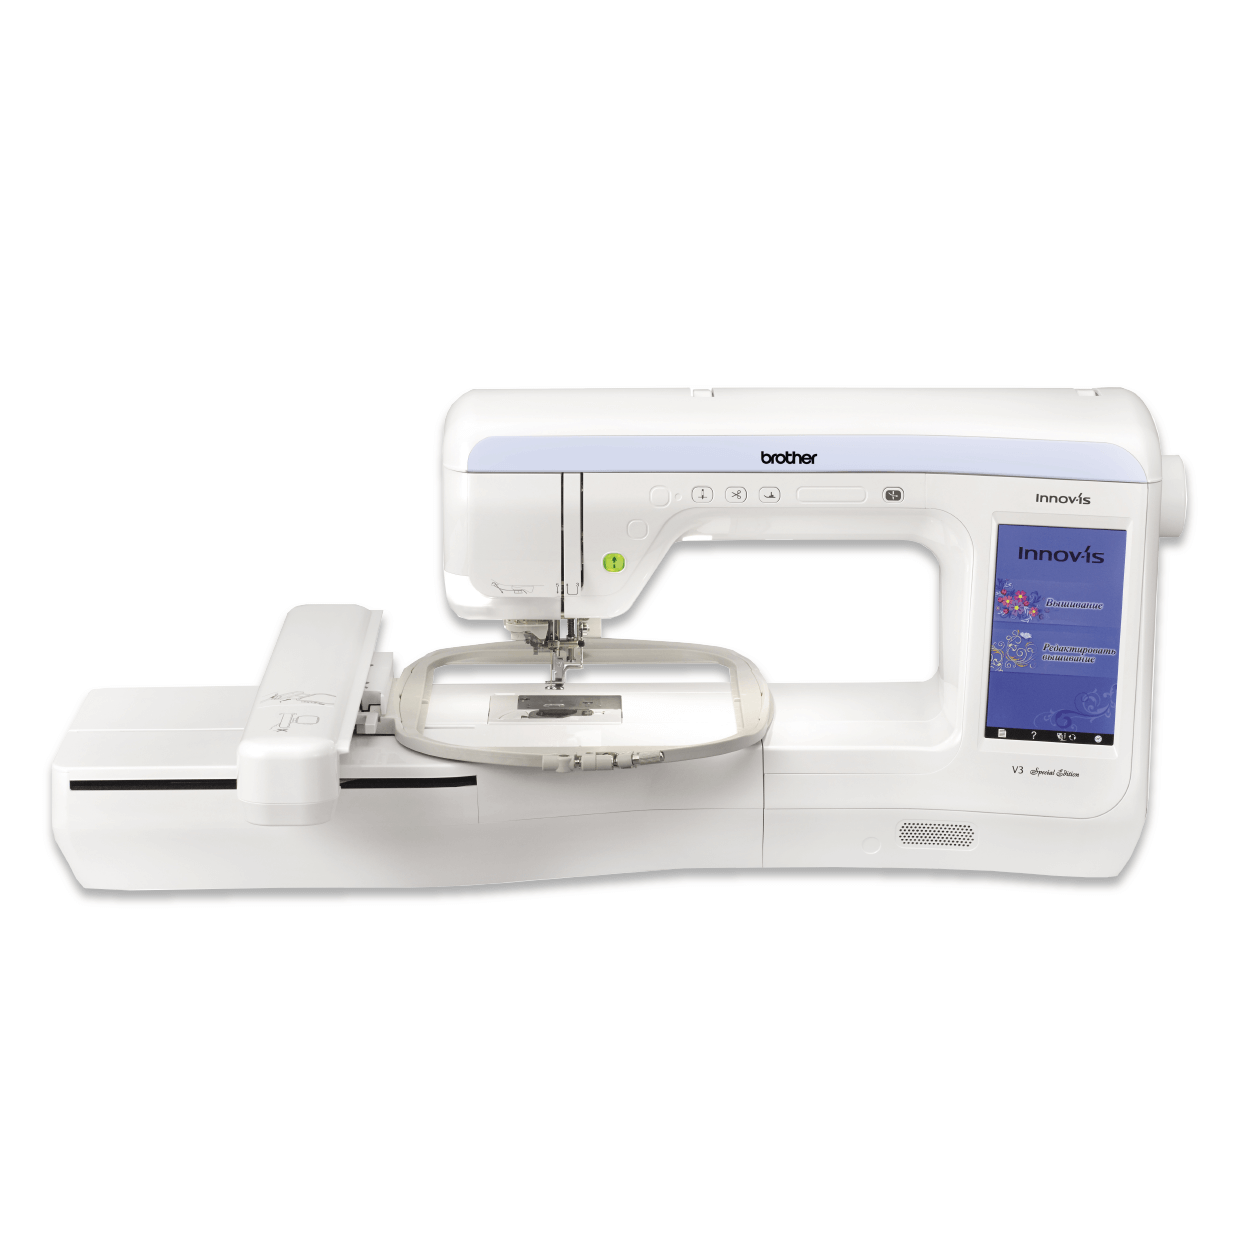 The Innov-is V3 Special Edition Embroidery Only Machine